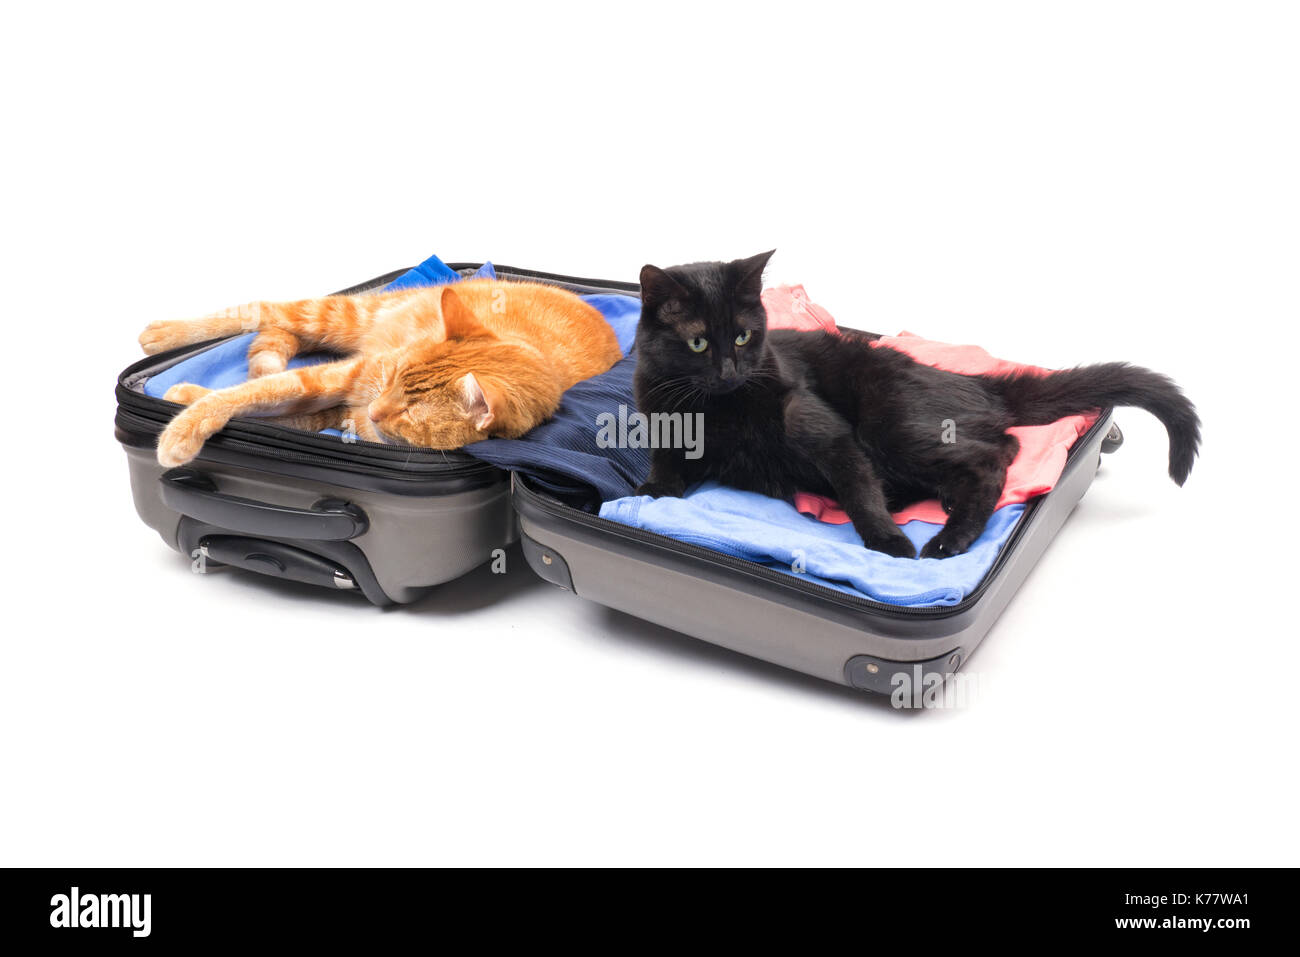 Two cats getting comfortable in an open, packed up luggage, ready to travel; on white Stock Photo